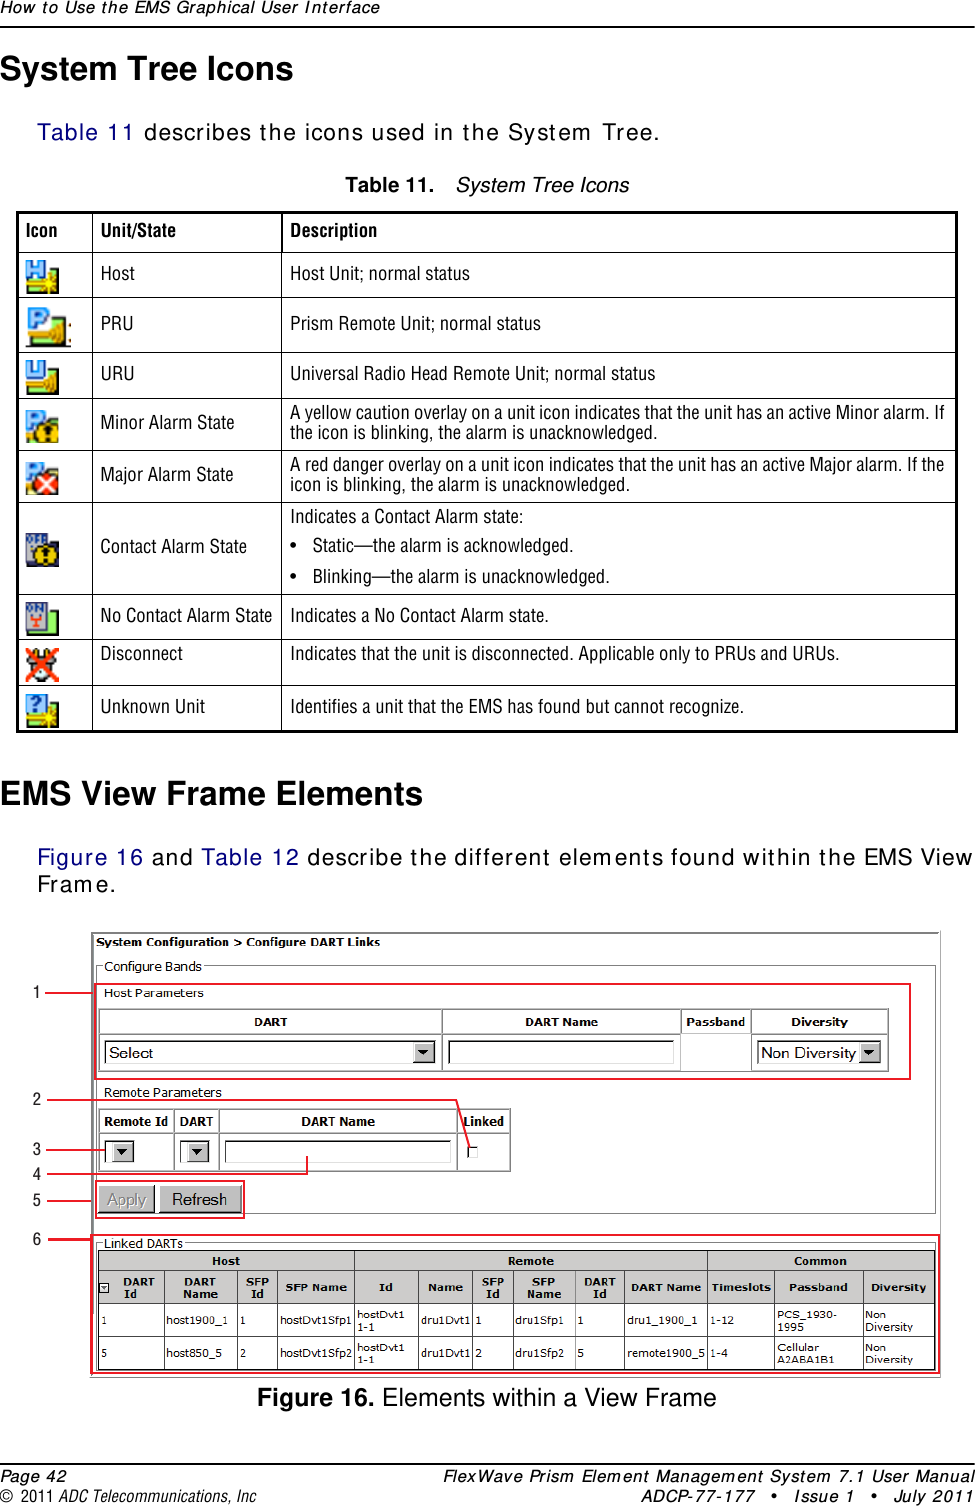 How to Use the EMS Graphical User Interface  Page 42 FlexWave Prism Element Management System 7.1 User Manual© 2011 ADC Telecommunications, Inc ADCP-77-177 • Issue 1 • July 2011System Tree IconsTable 11 describes the icons used in the System Tree.EMS View Frame ElementsFigure 16 and Table 12 describe the different elements found within the EMS View Frame.Figure 16. Elements within a View FrameTable 11. System Tree IconsIcon Unit/State DescriptionHost Host Unit; normal statusPRU Prism Remote Unit; normal statusURU Universal Radio Head Remote Unit; normal statusMinor Alarm State A yellow caution overlay on a unit icon indicates that the unit has an active Minor alarm. If the icon is blinking, the alarm is unacknowledged.Major Alarm State A red danger overlay on a unit icon indicates that the unit has an active Major alarm. If the icon is blinking, the alarm is unacknowledged.Contact Alarm StateIndicates a Contact Alarm state:• Static—the alarm is acknowledged.• Blinking—the alarm is unacknowledged.No Contact Alarm State Indicates a No Contact Alarm state. Disconnect Indicates that the unit is disconnected. Applicable only to PRUs and URUs.Unknown Unit Identifies a unit that the EMS has found but cannot recognize. 123456